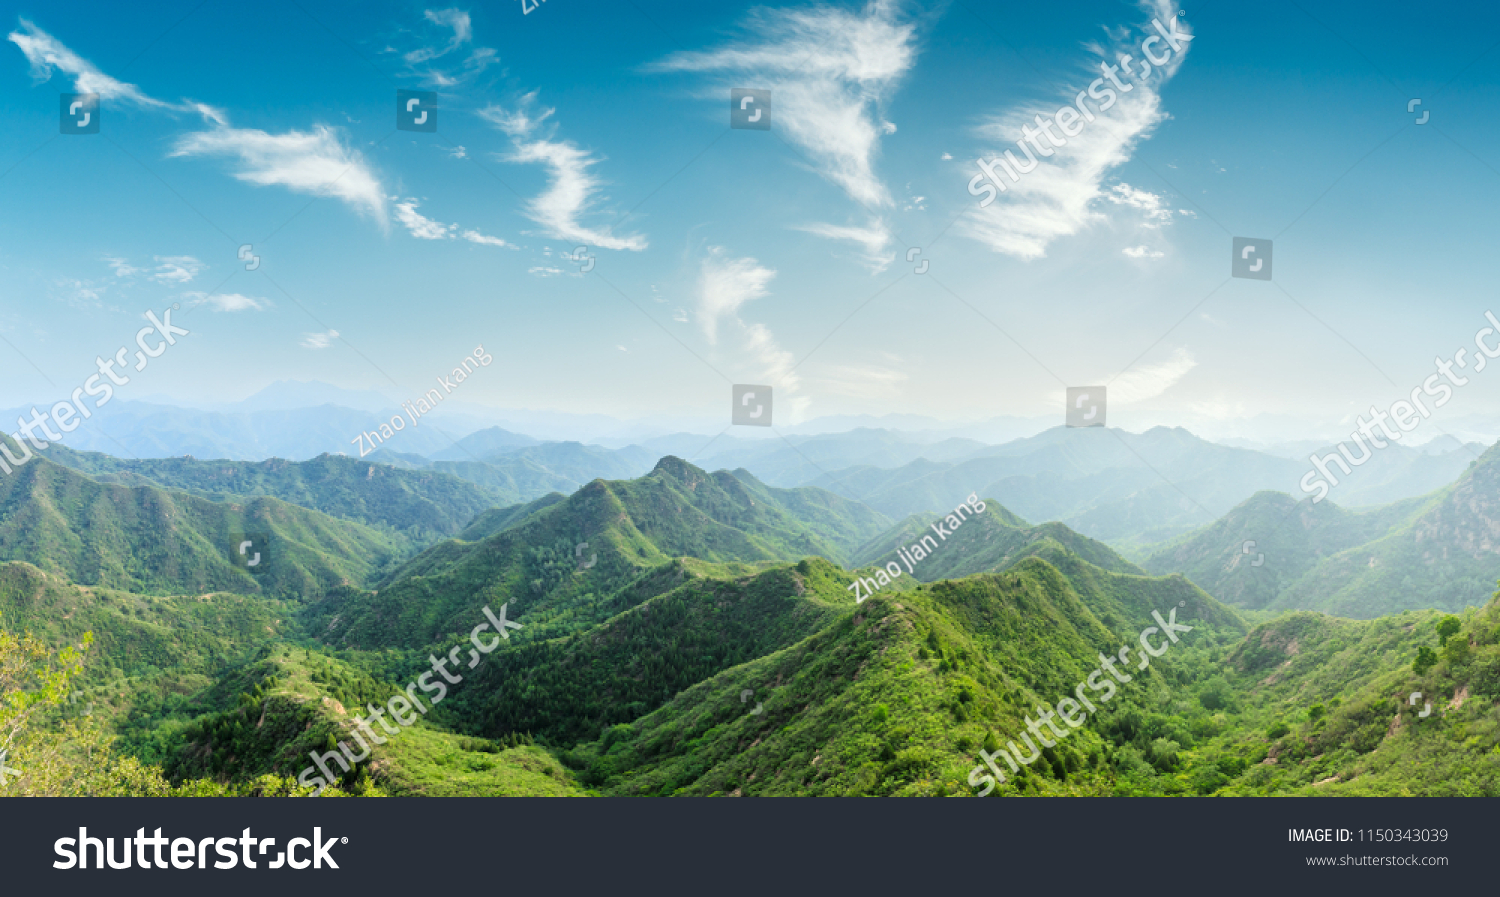 Green mountains and beautiful sky clouds under the blue sky #1150343039